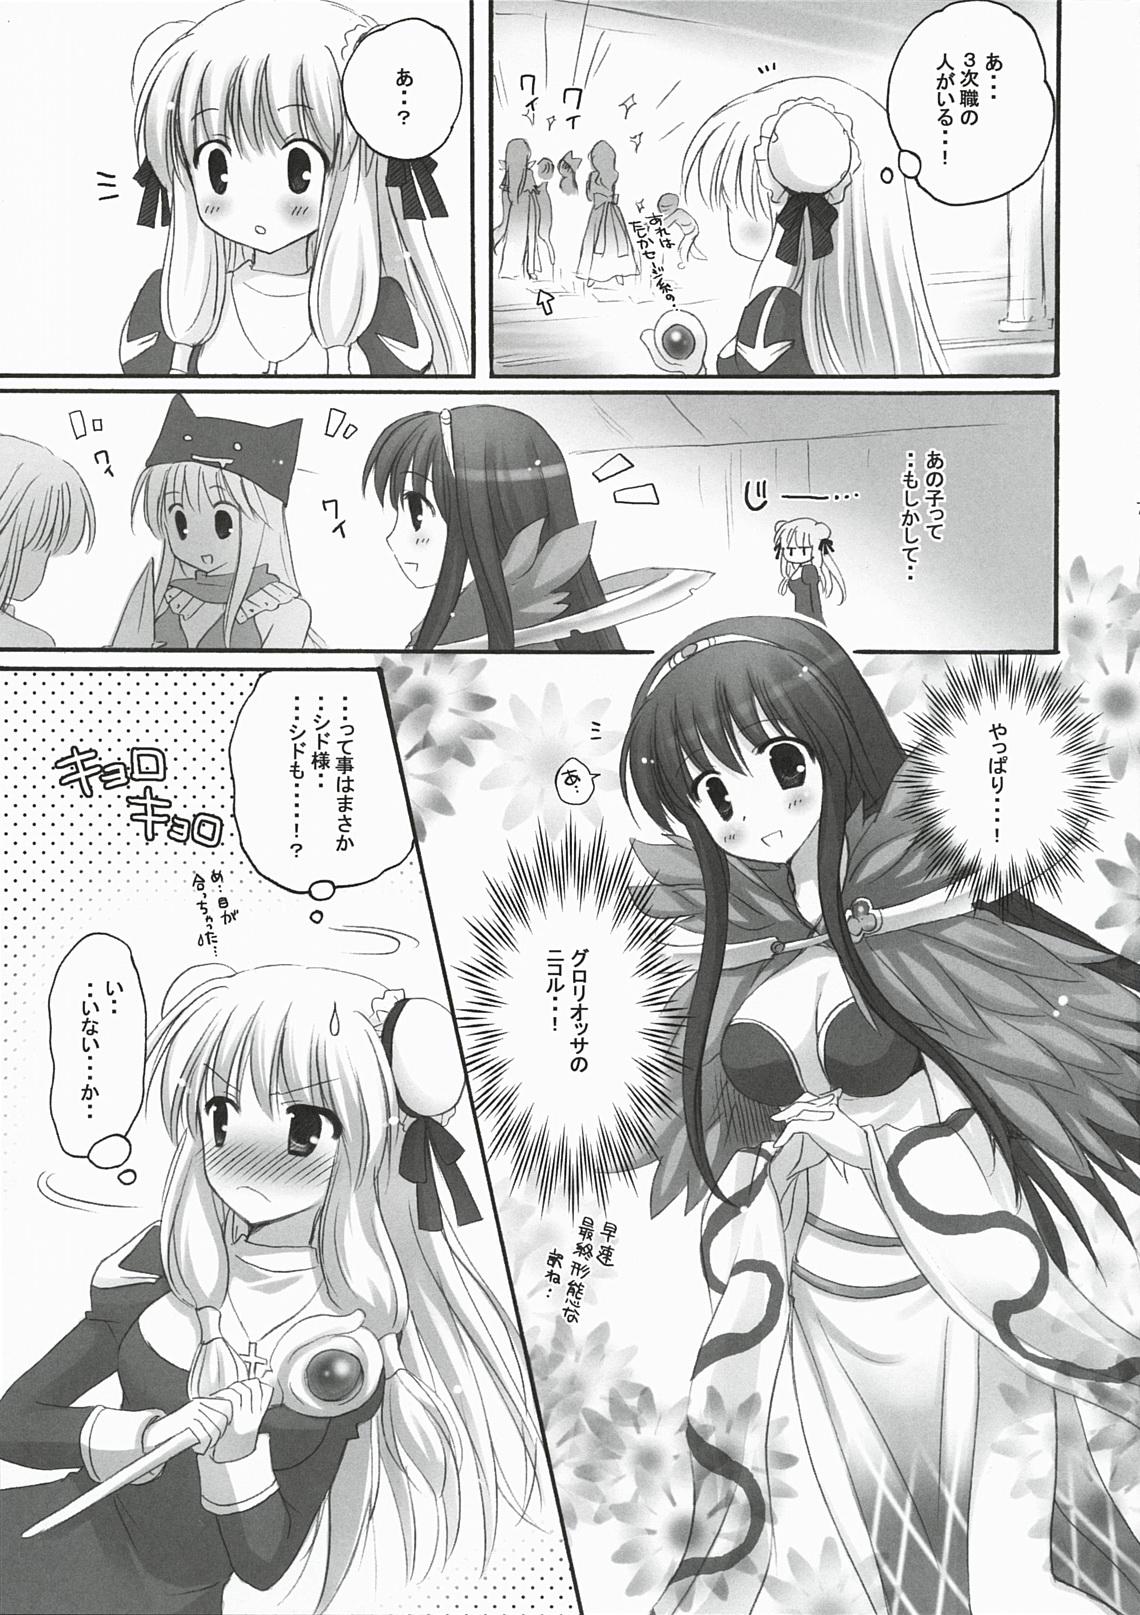 Muscle You are mine - Ragnarok online Fucking - Page 6